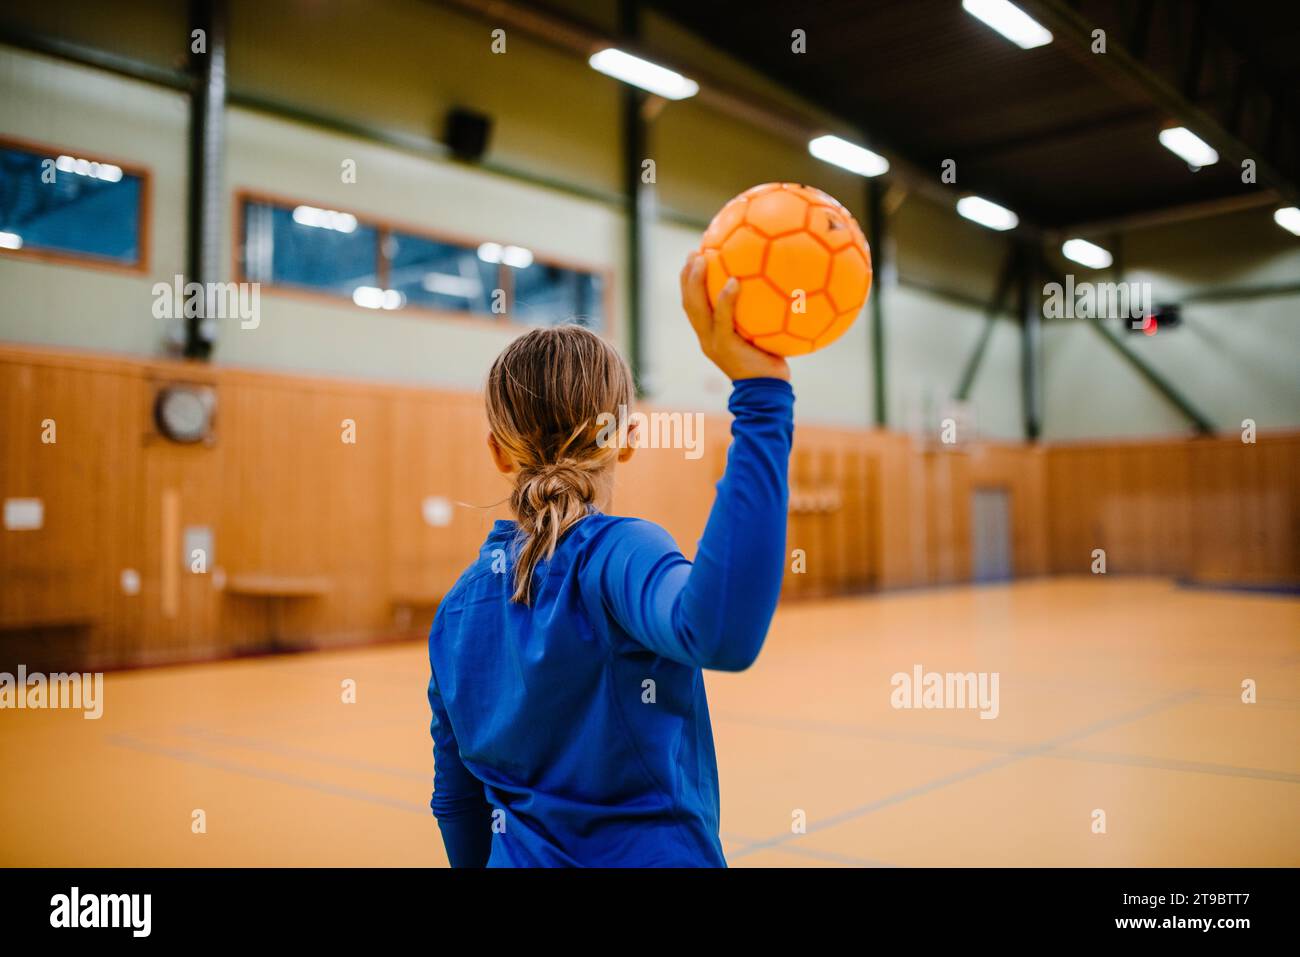 Rear view of girl holding handball in sports court Stock Photo